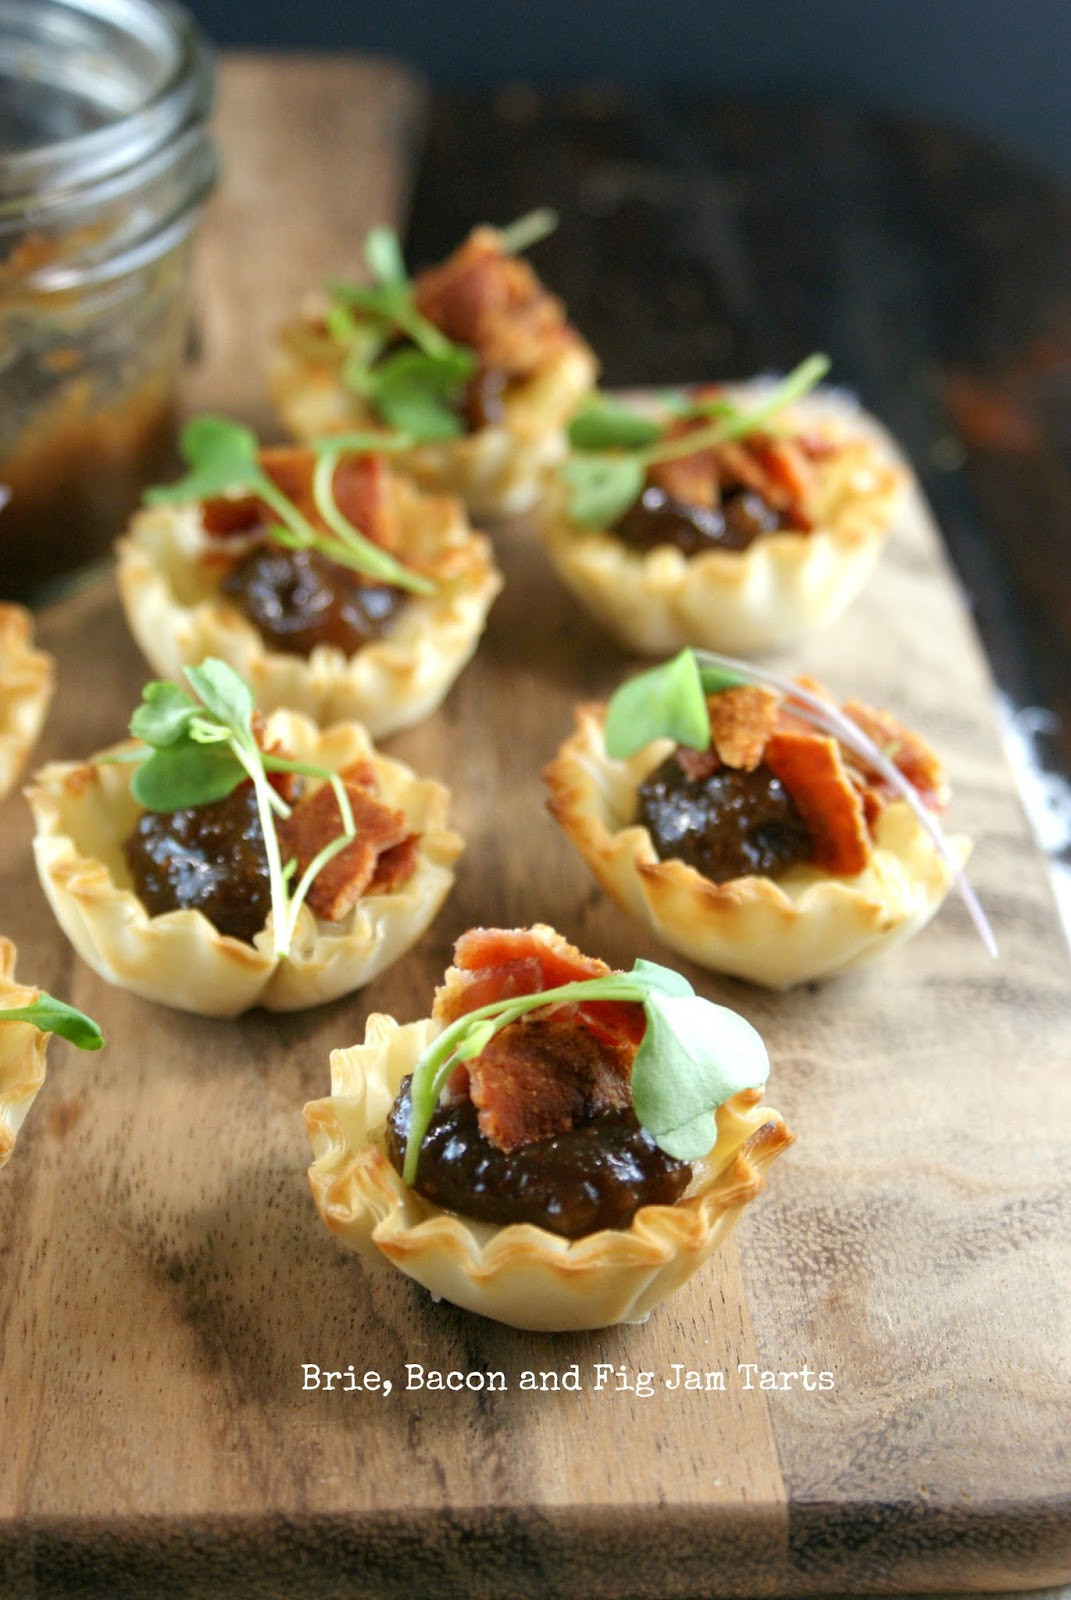 Gourmet Appetizers Recipe
 Authentic Suburban Gourmet Brie Bacon and Fig Jam Tarts